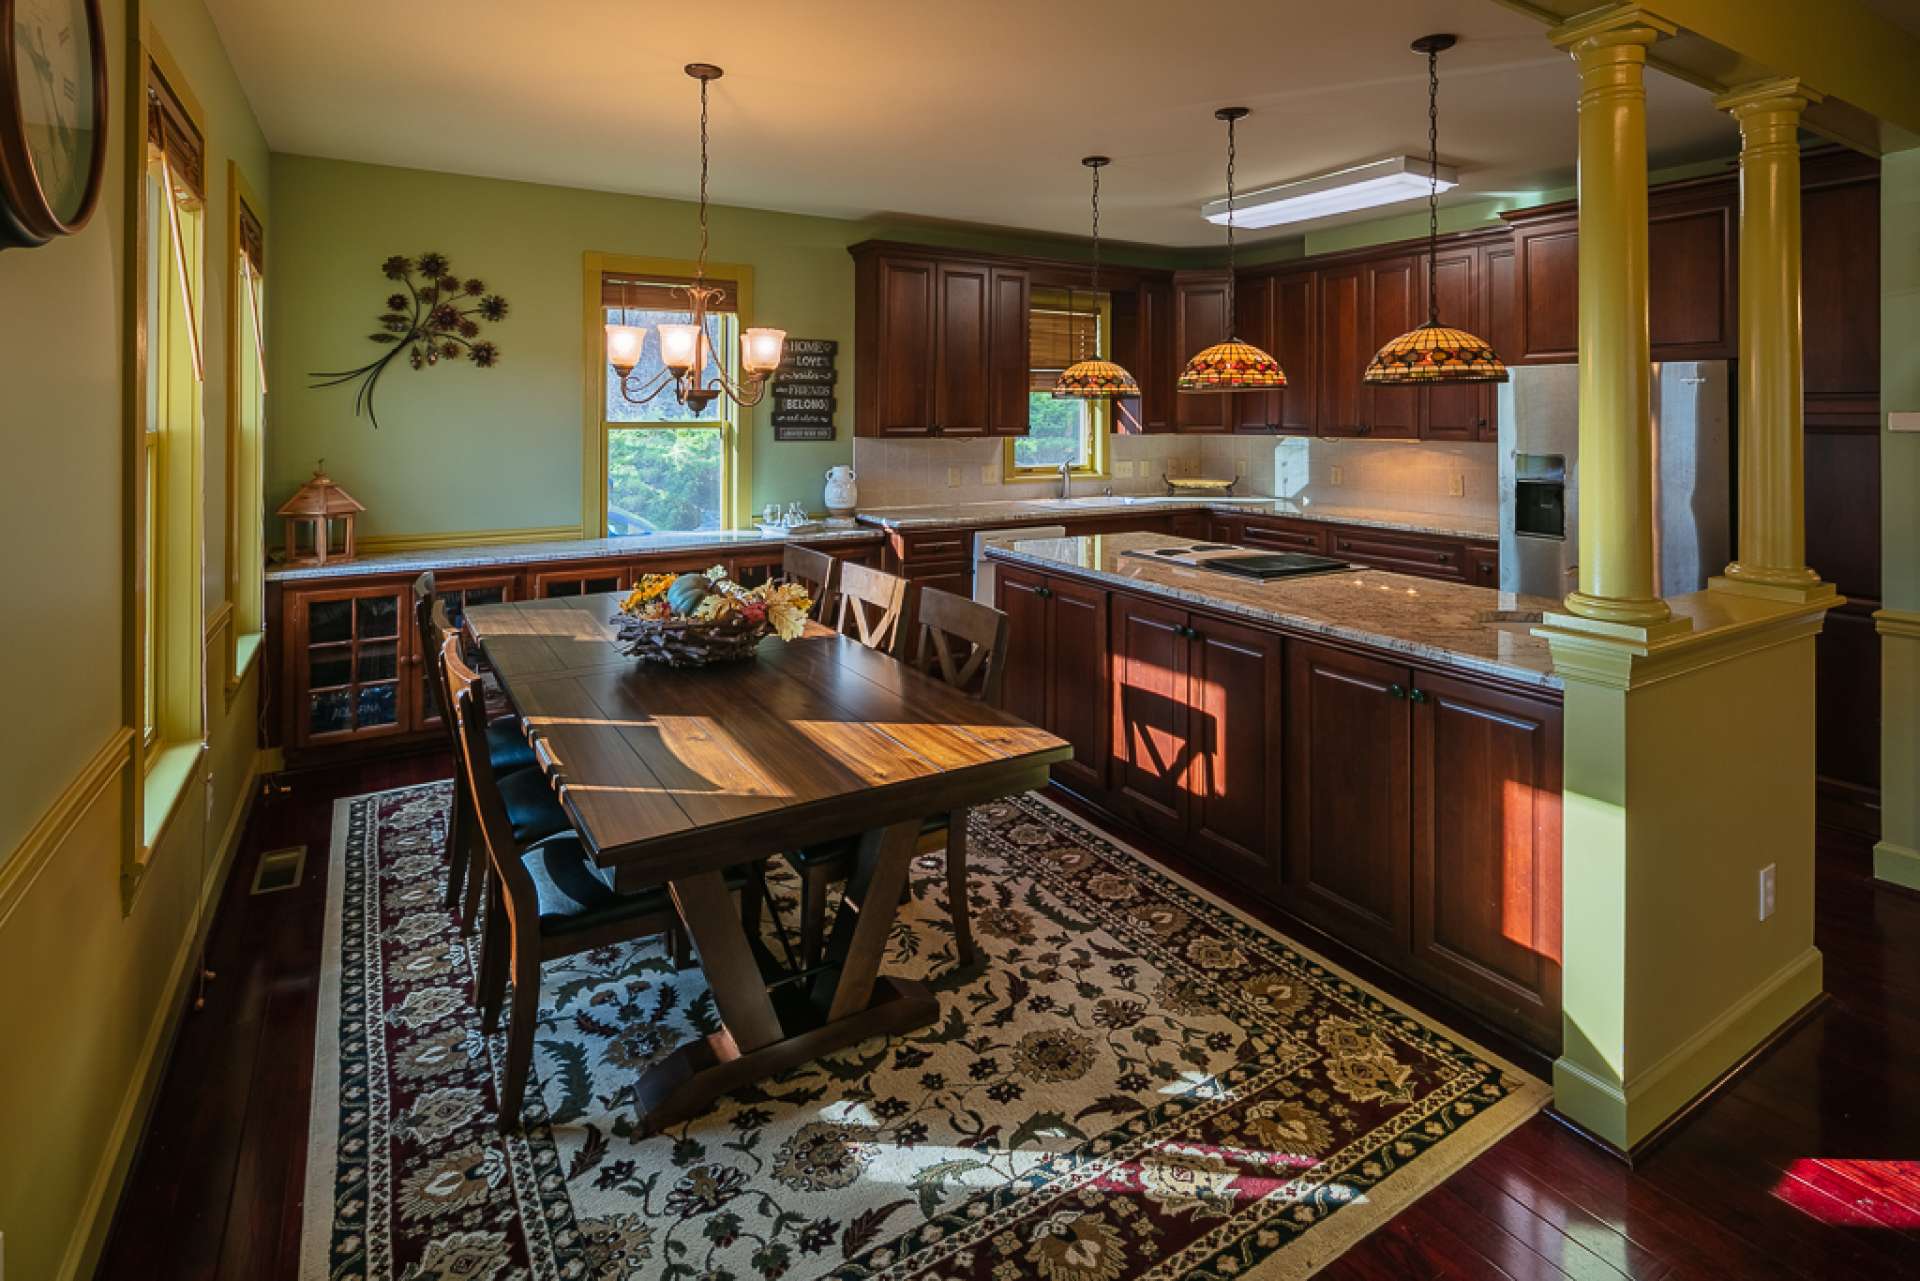 The kitchen is open to the dining and living areas and offers lots of work and storage space.